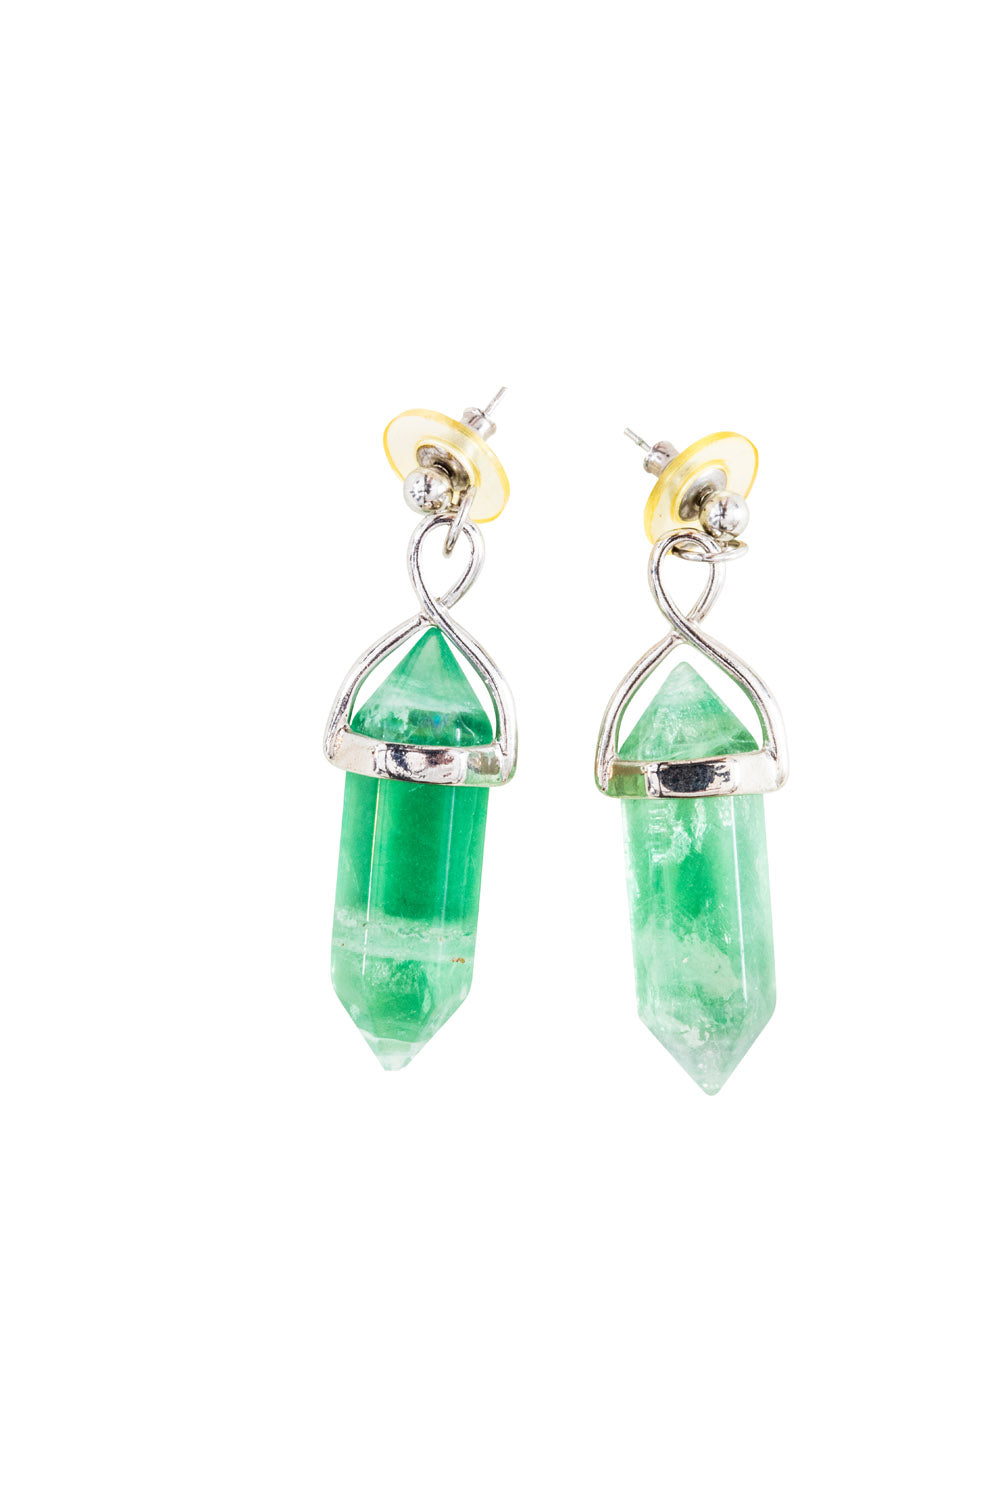 Whole Raw Green Quartz Crystal With Silver Bar Detail Earrings